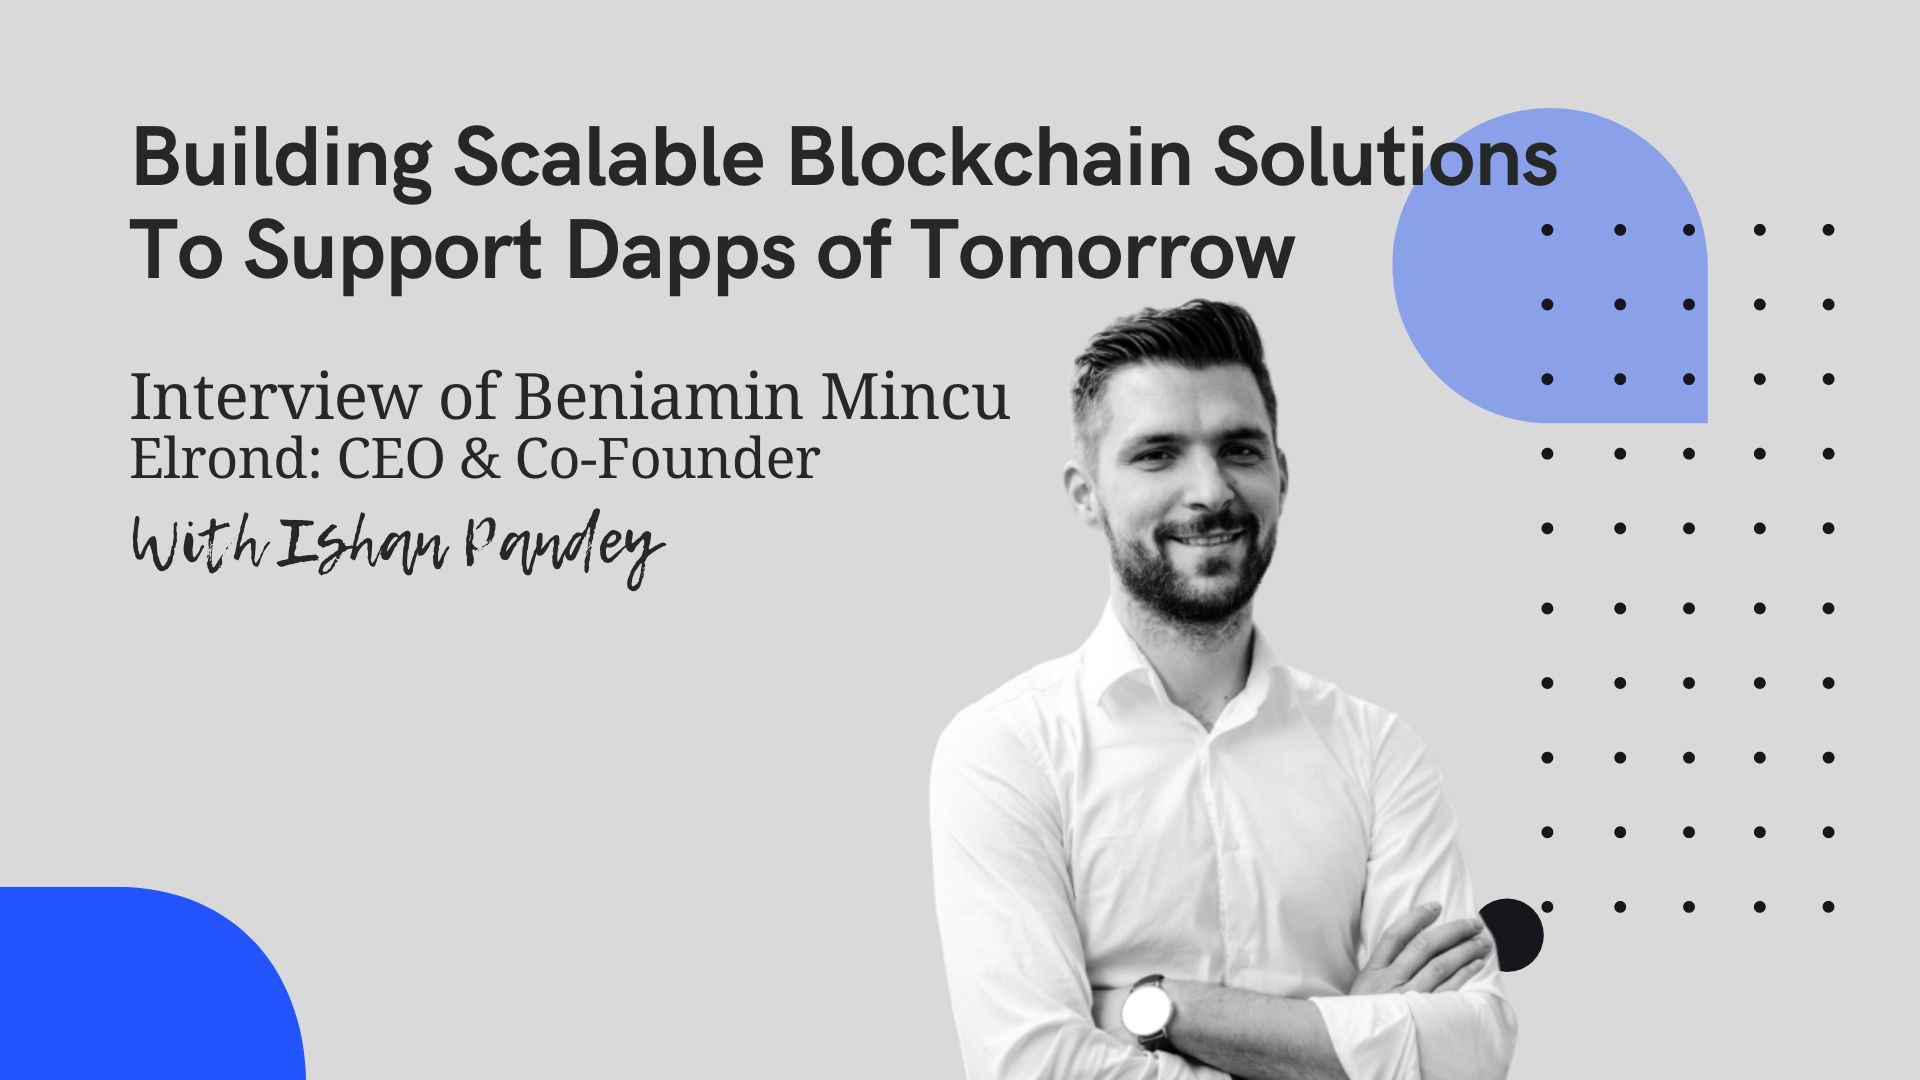 featured image - Building Scalable Blockchain Solutions To Support Dapps of Tomorrow - An Interview